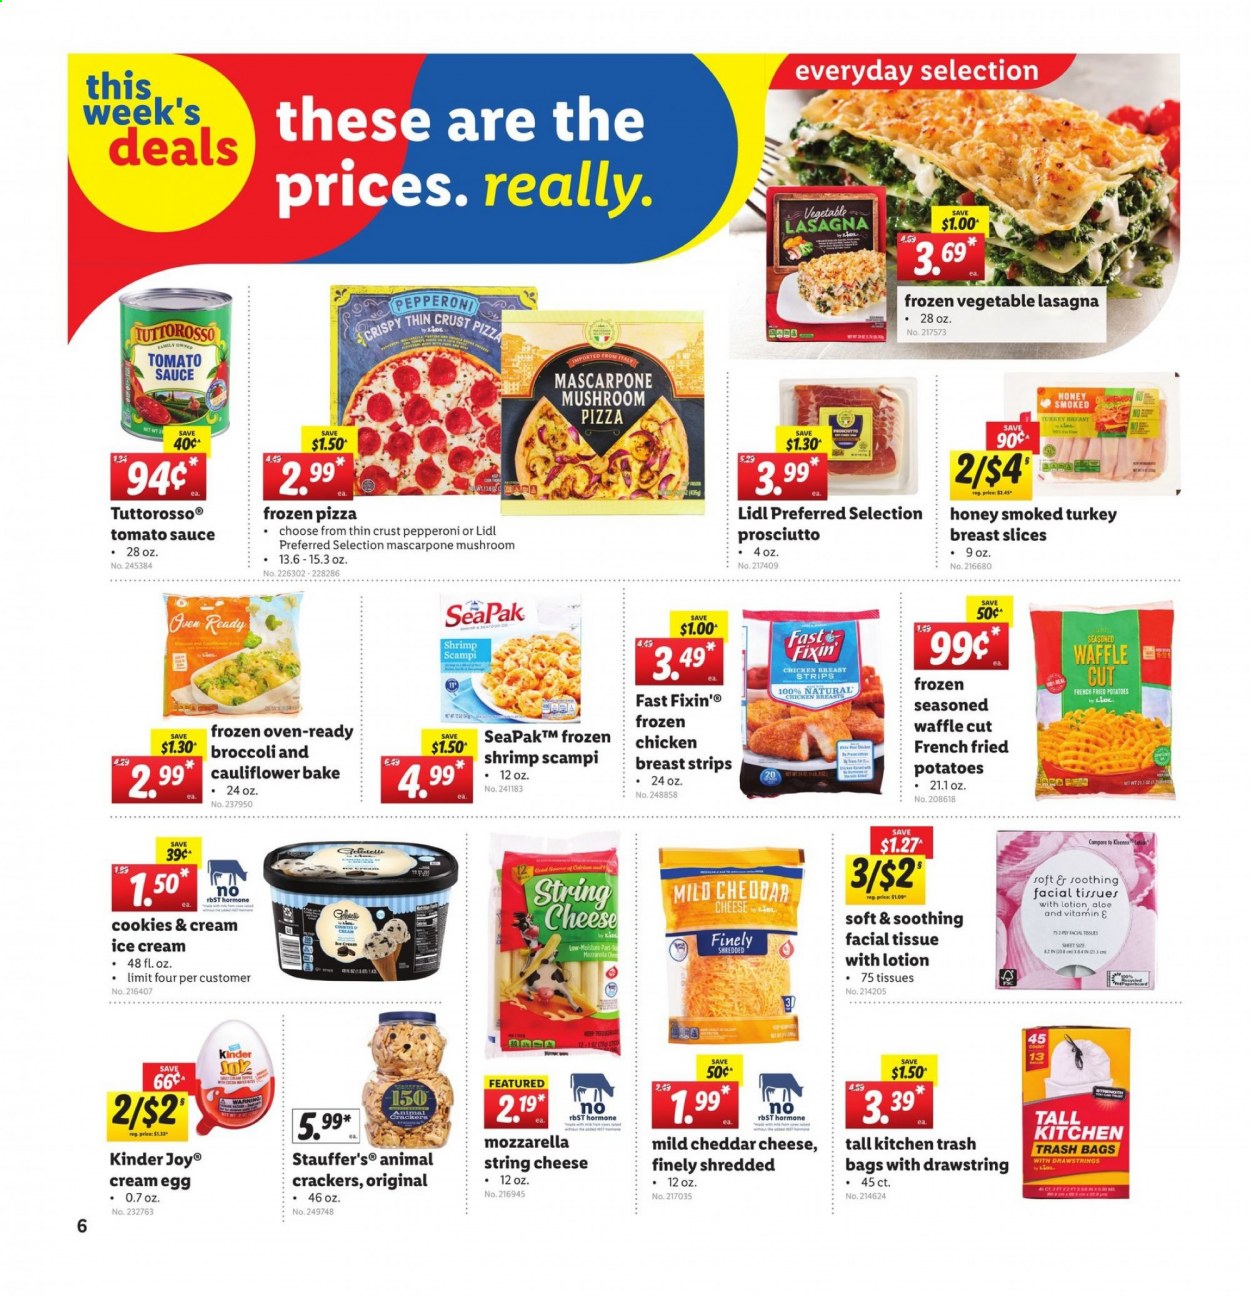 thumbnail - Lidl Flyer - 05/05/2021 - 05/11/2021 - Sales products - Fast Fixin', broccoli, cauliflower, potatoes, shrimps, pizza, sauce, lasagna meal, prosciutto, pepperoni, mascarpone, mild cheddar, string cheese, cheddar, eggs, ice cream, strips, cookies, Kinder Joy, crackers, tomato sauce, honey, chicken breasts, tissues, facial tissues, body lotion, trash bags. Page 6.